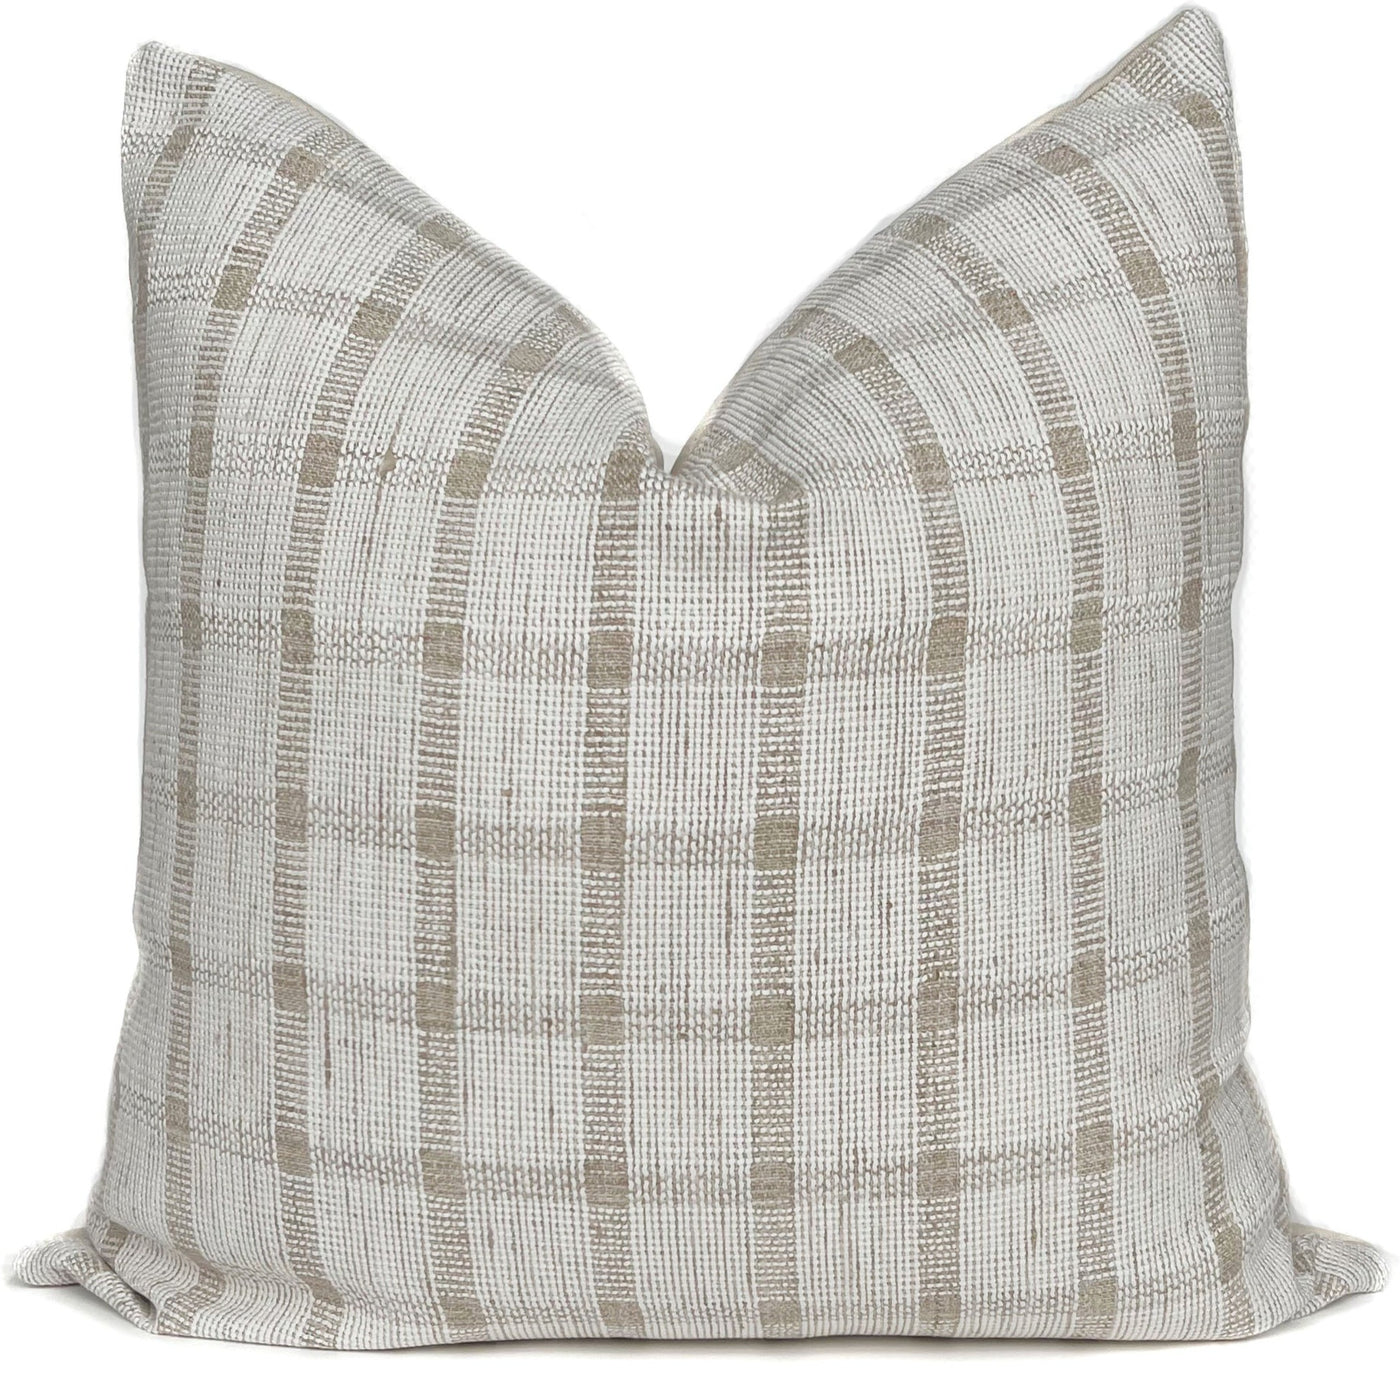 White And Beige Plaid Pillow Er